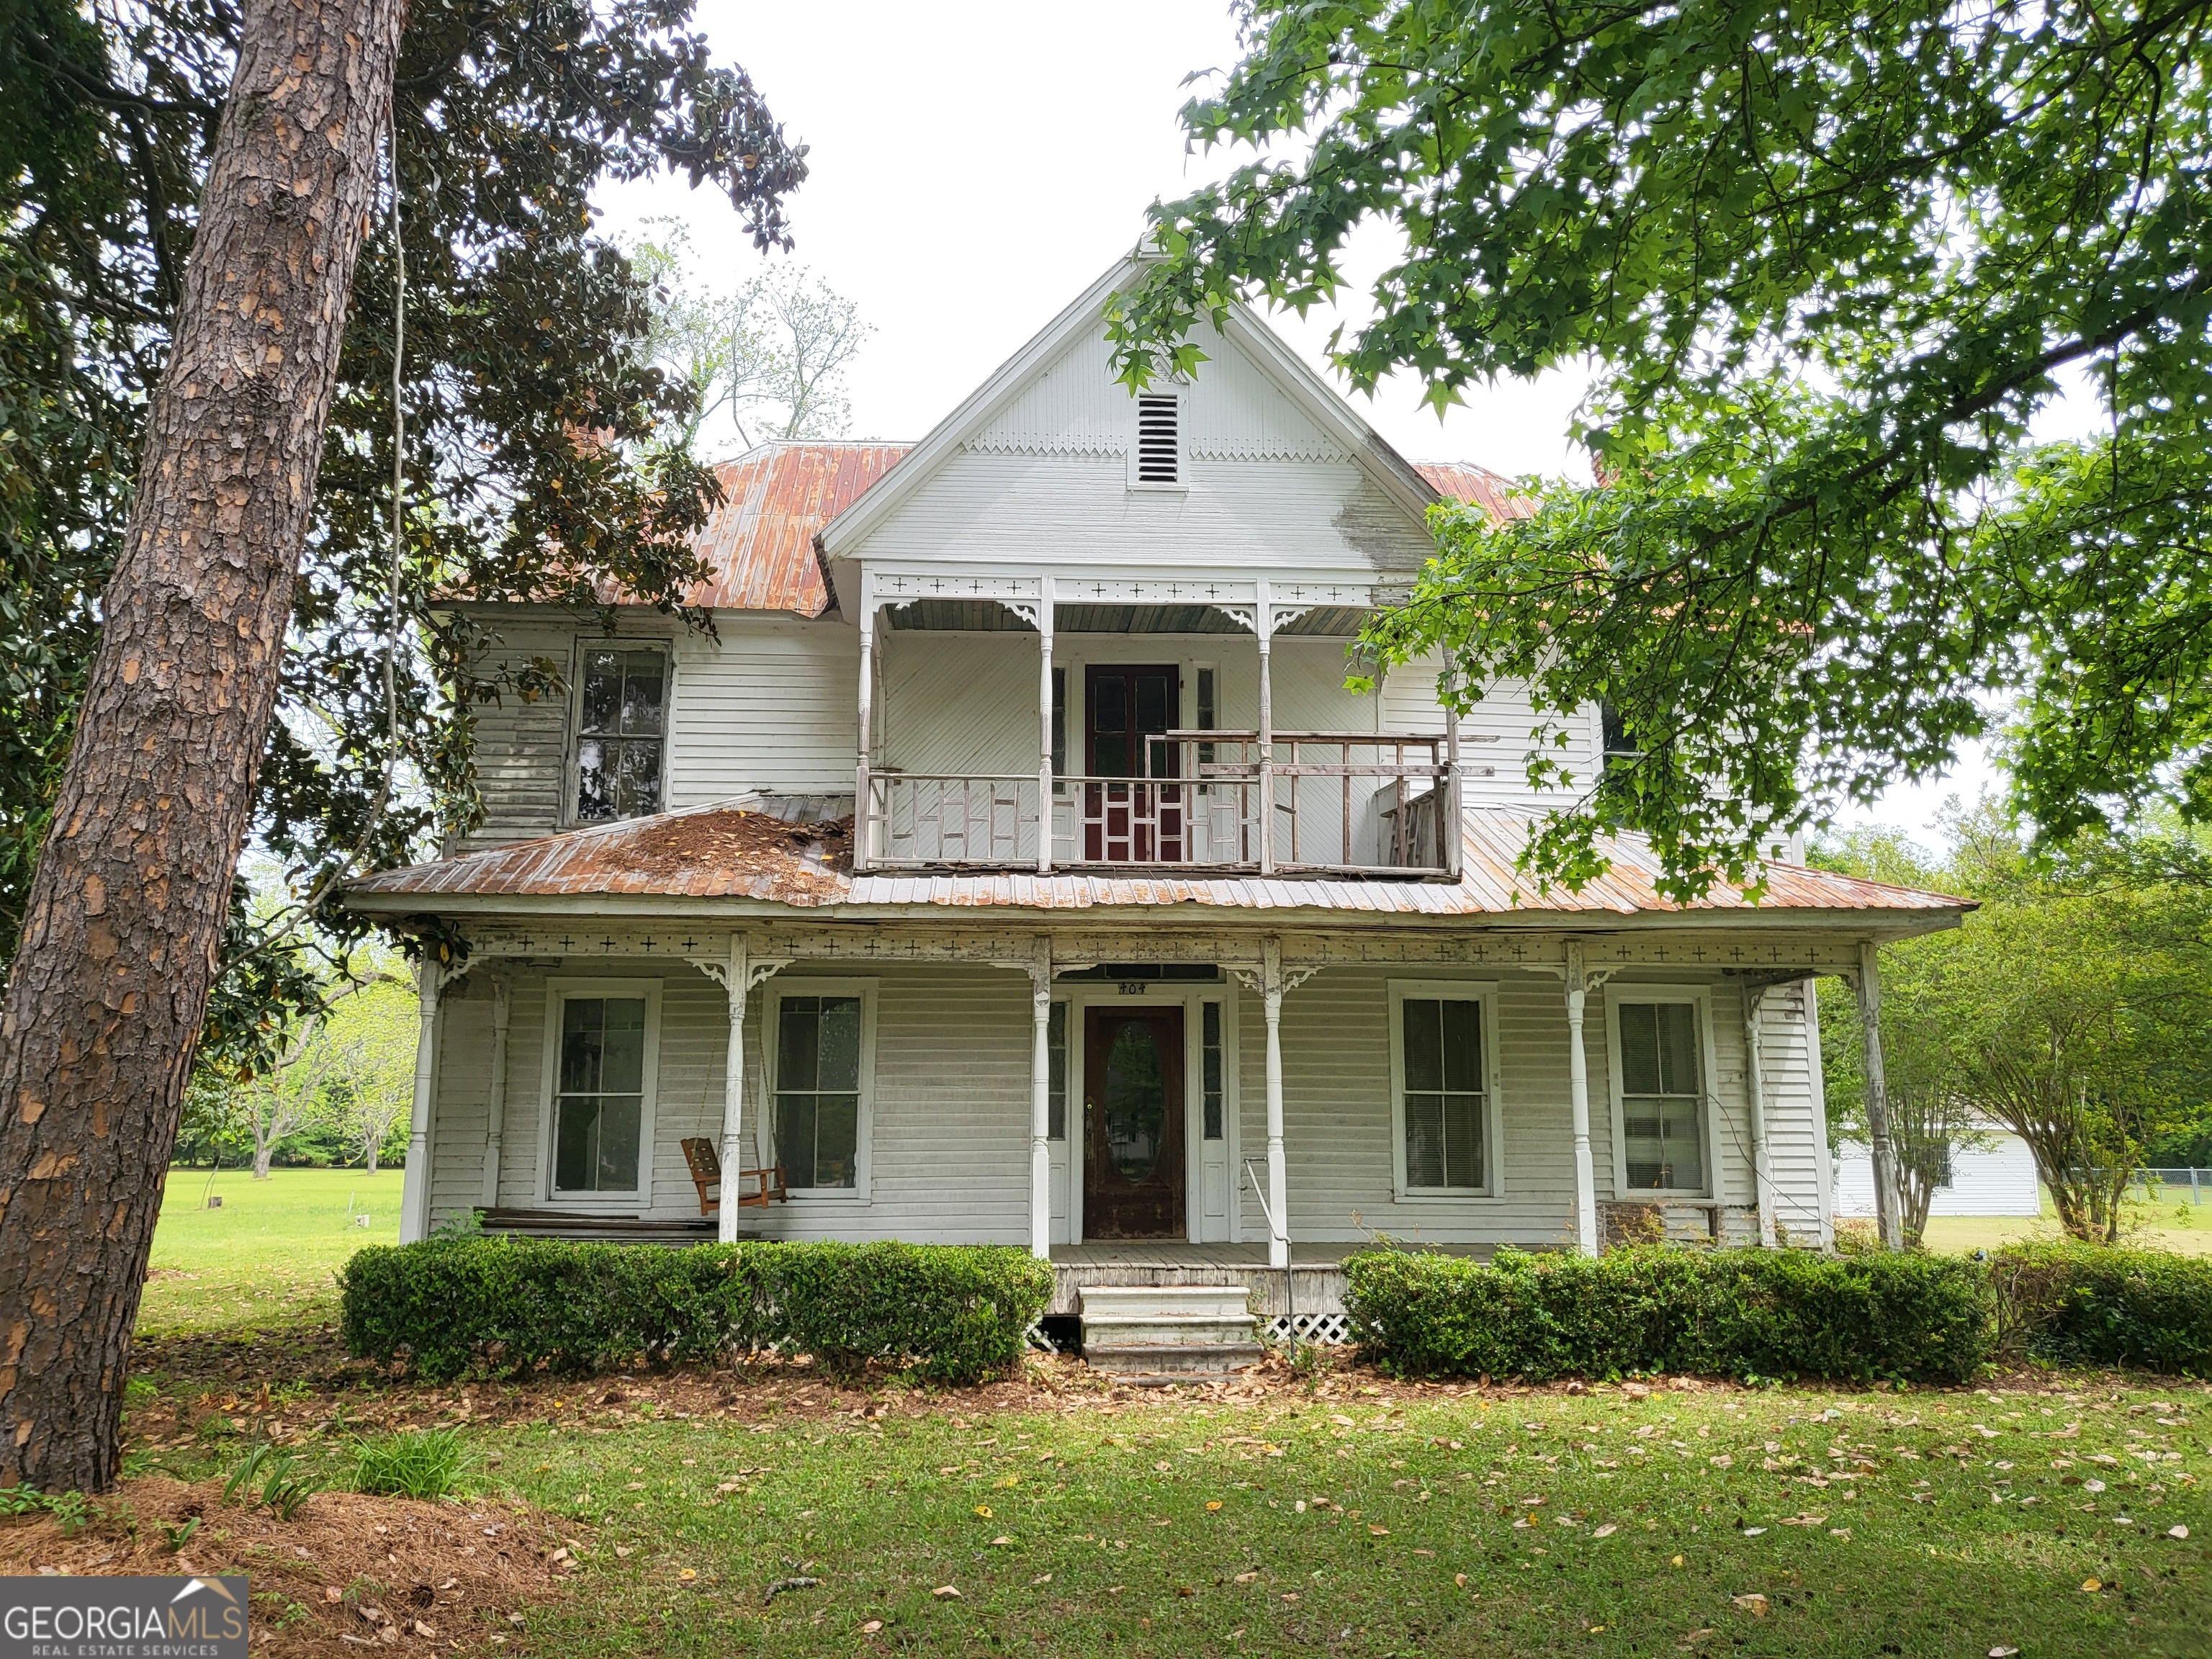 a front view of a house with porch and garden